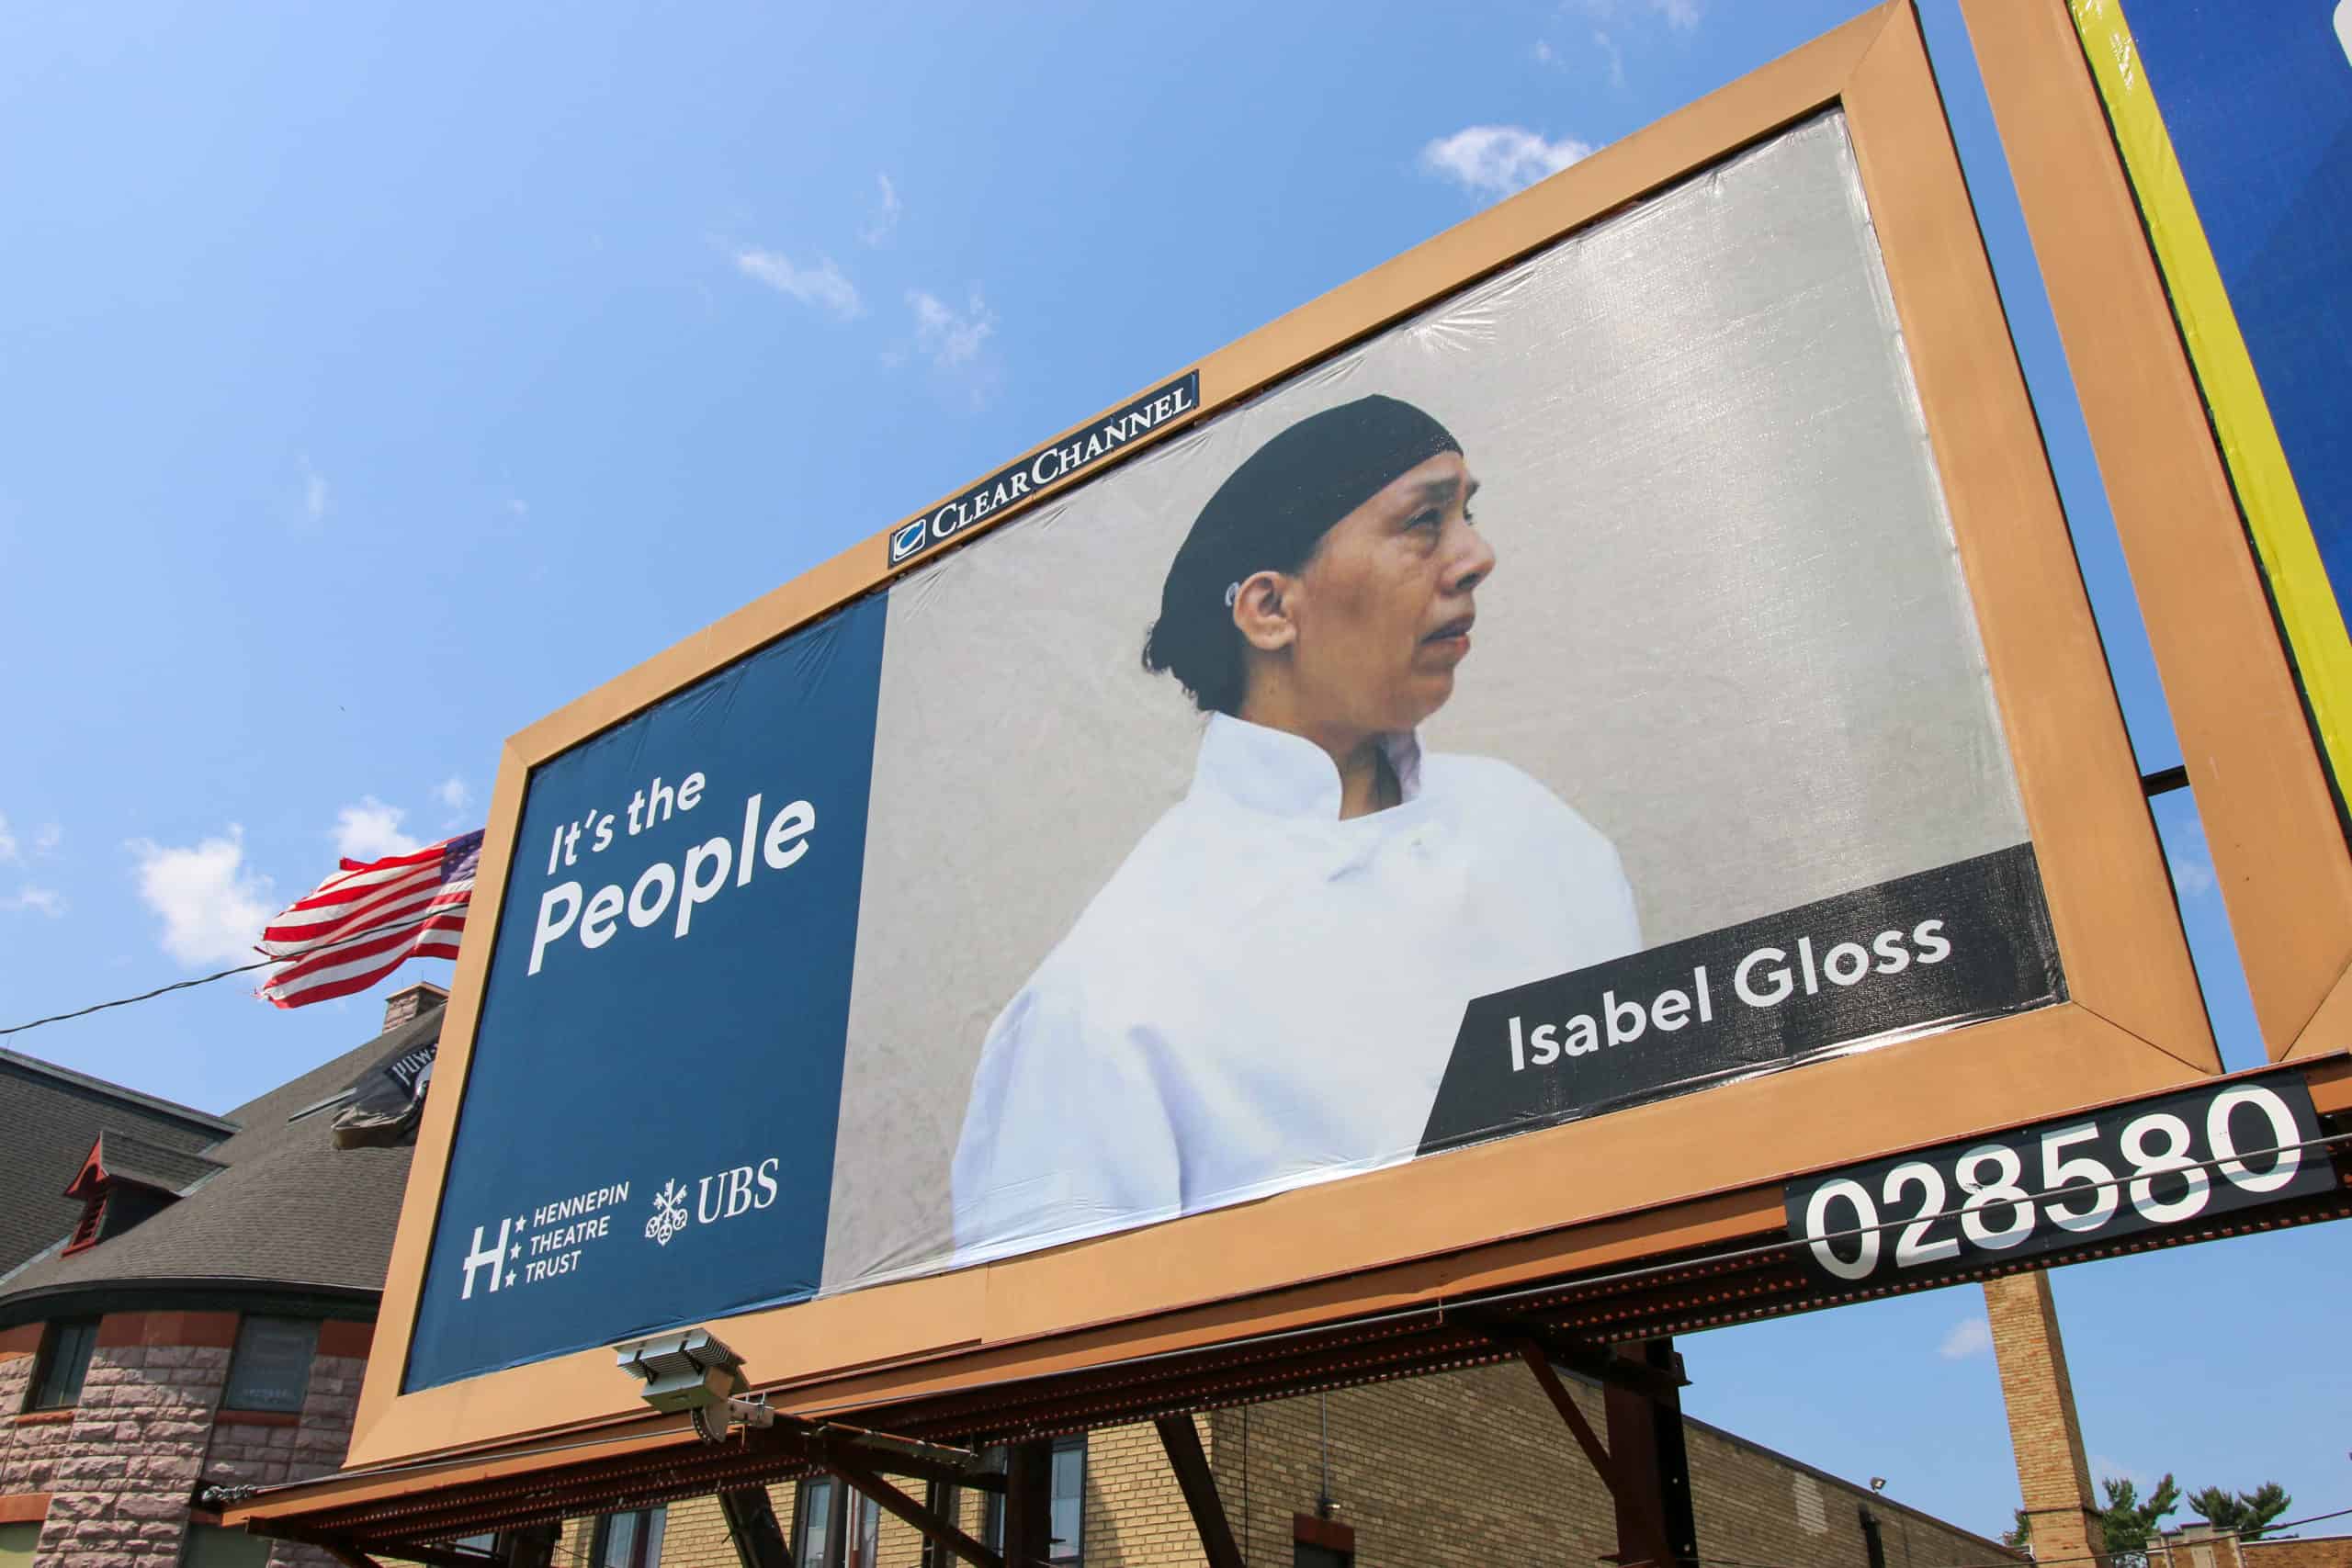 Isabel Gloss' "It's the People" banner portrait